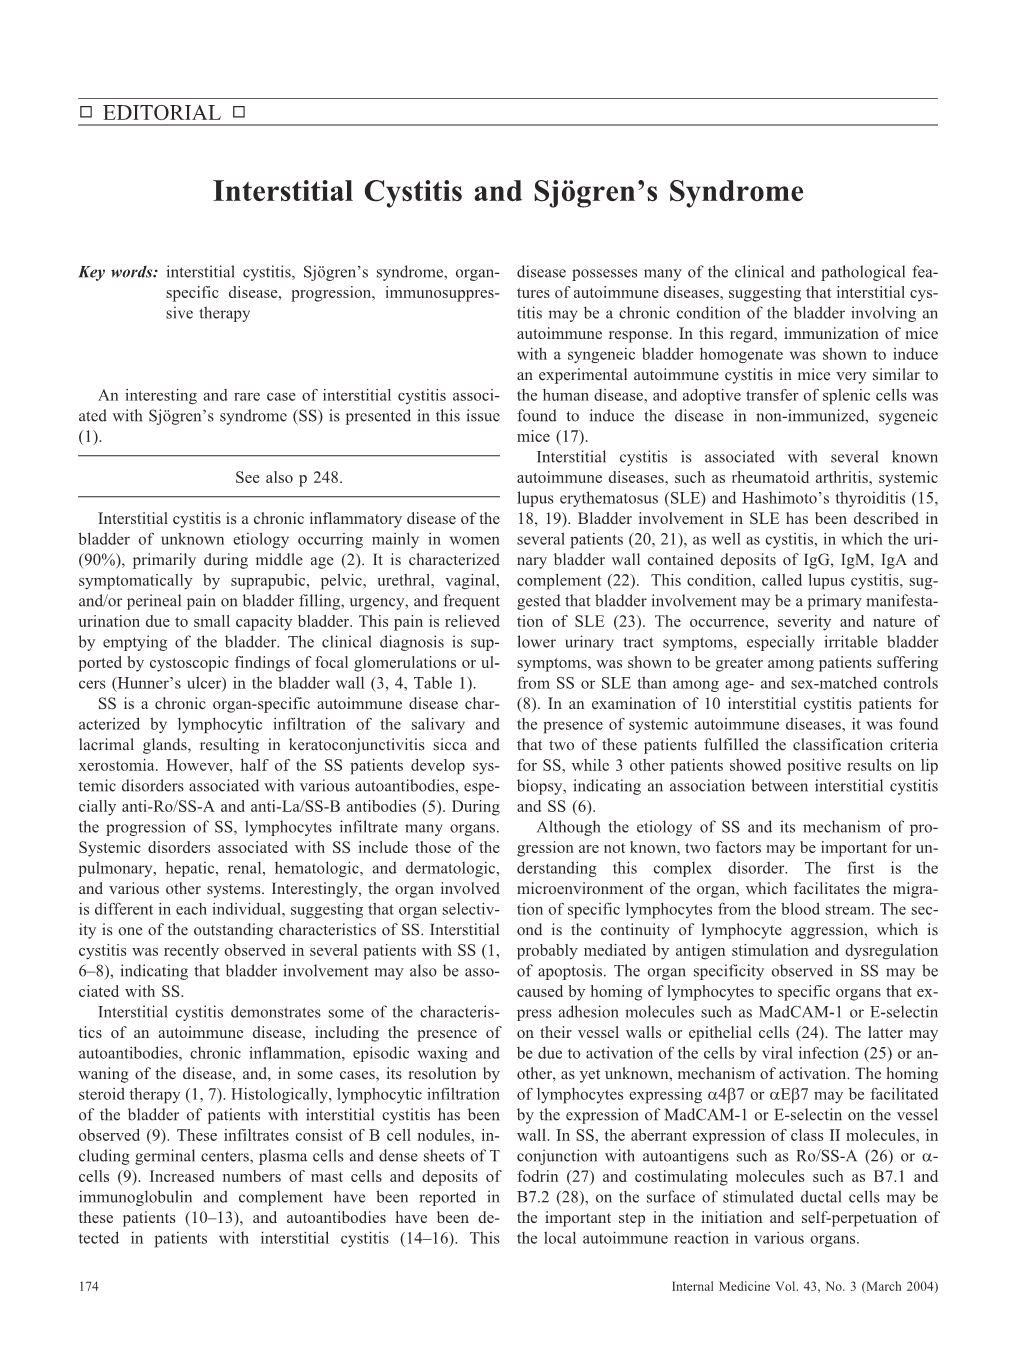 Interstitial Cystitis and Sjögren's Syndrome